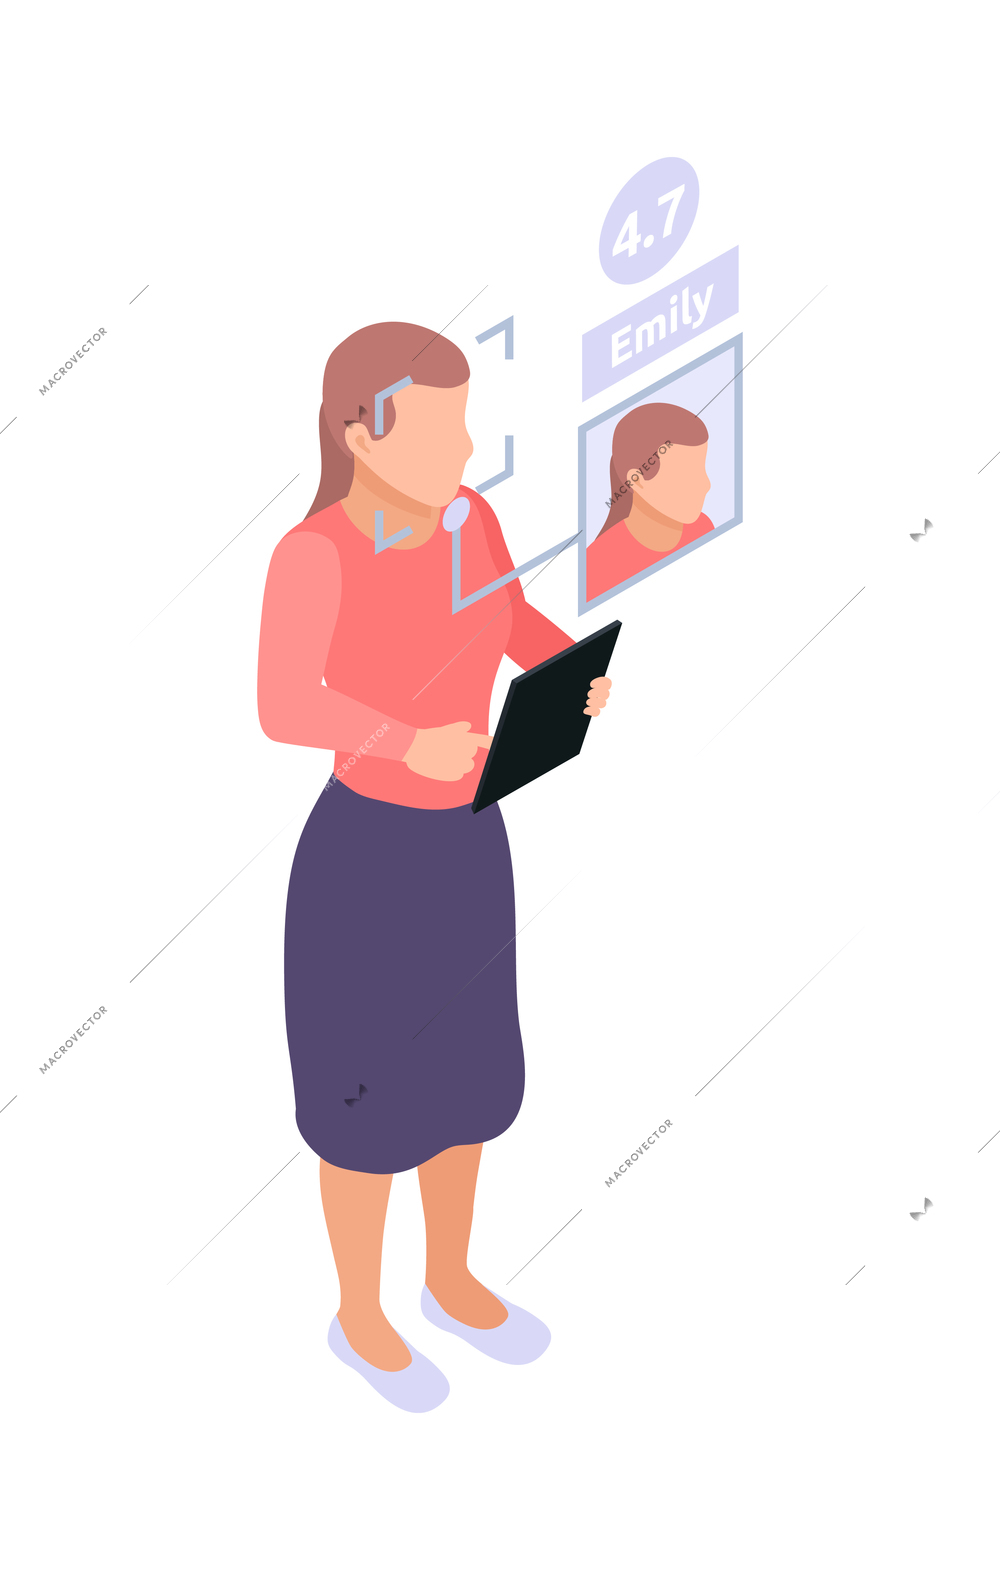 Social credit score system isometric composition with human characters rating pictograms and profile vector illustration